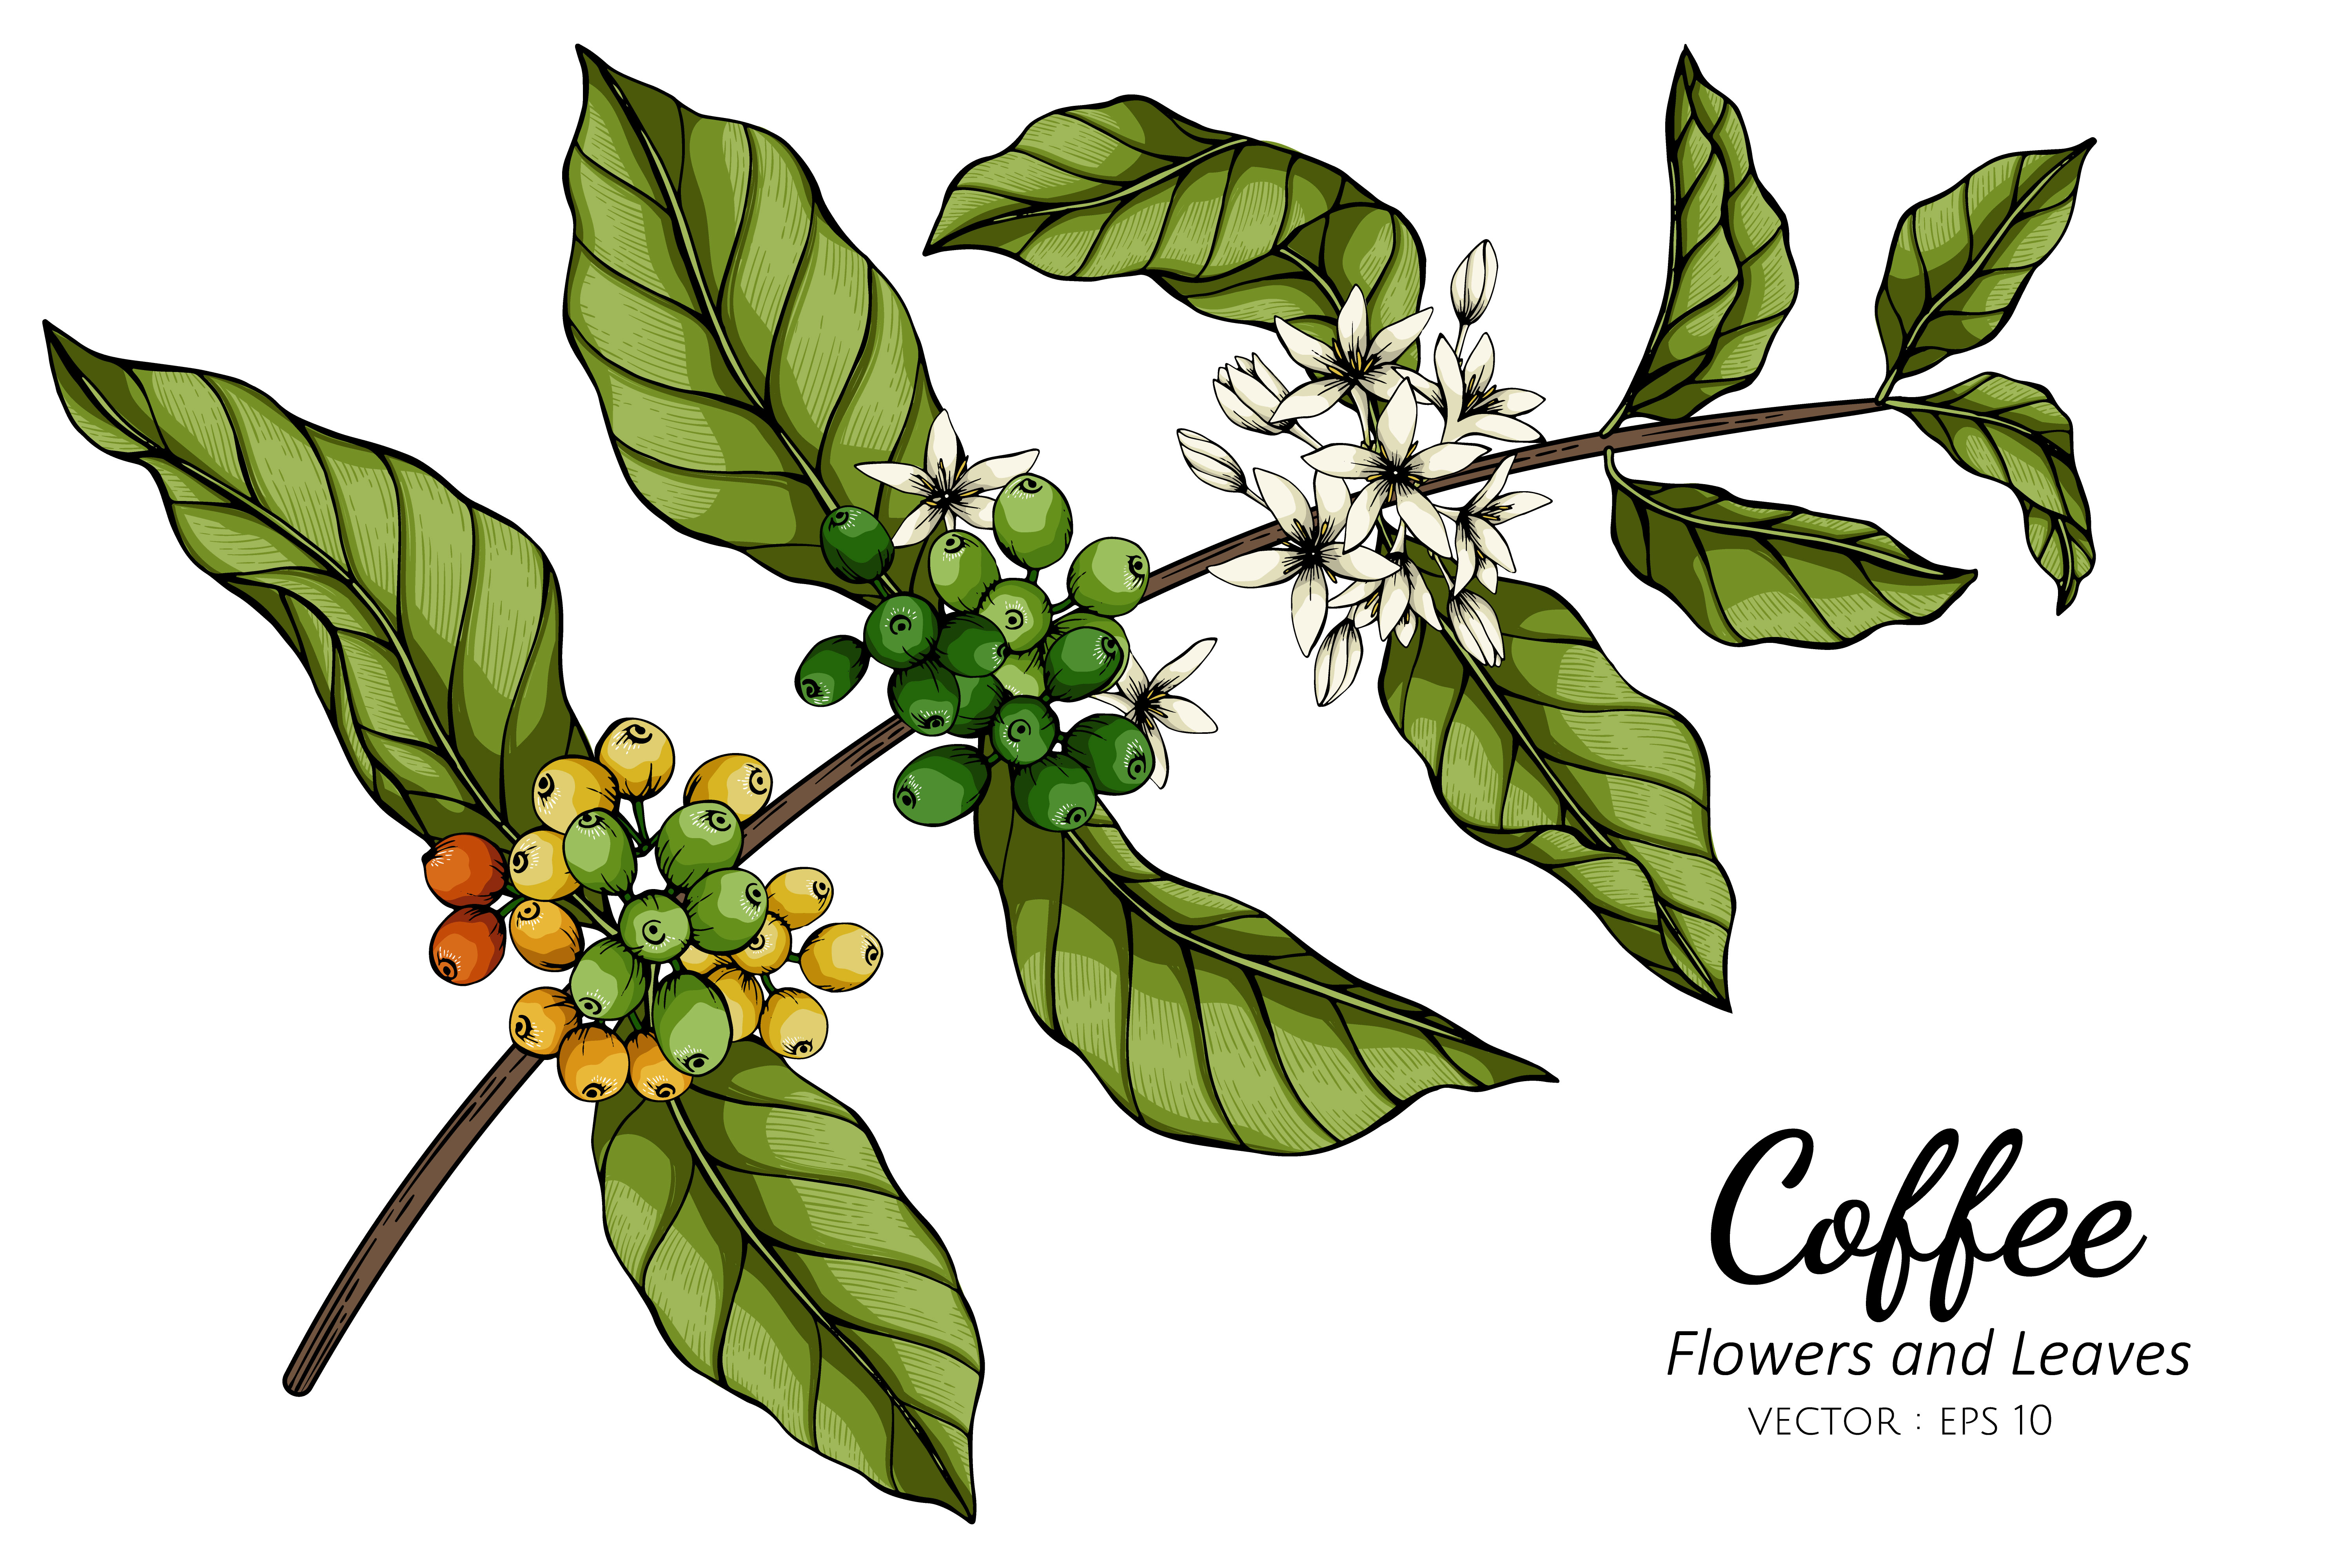 Coffee flower and leaf drawing 697930 Download Free